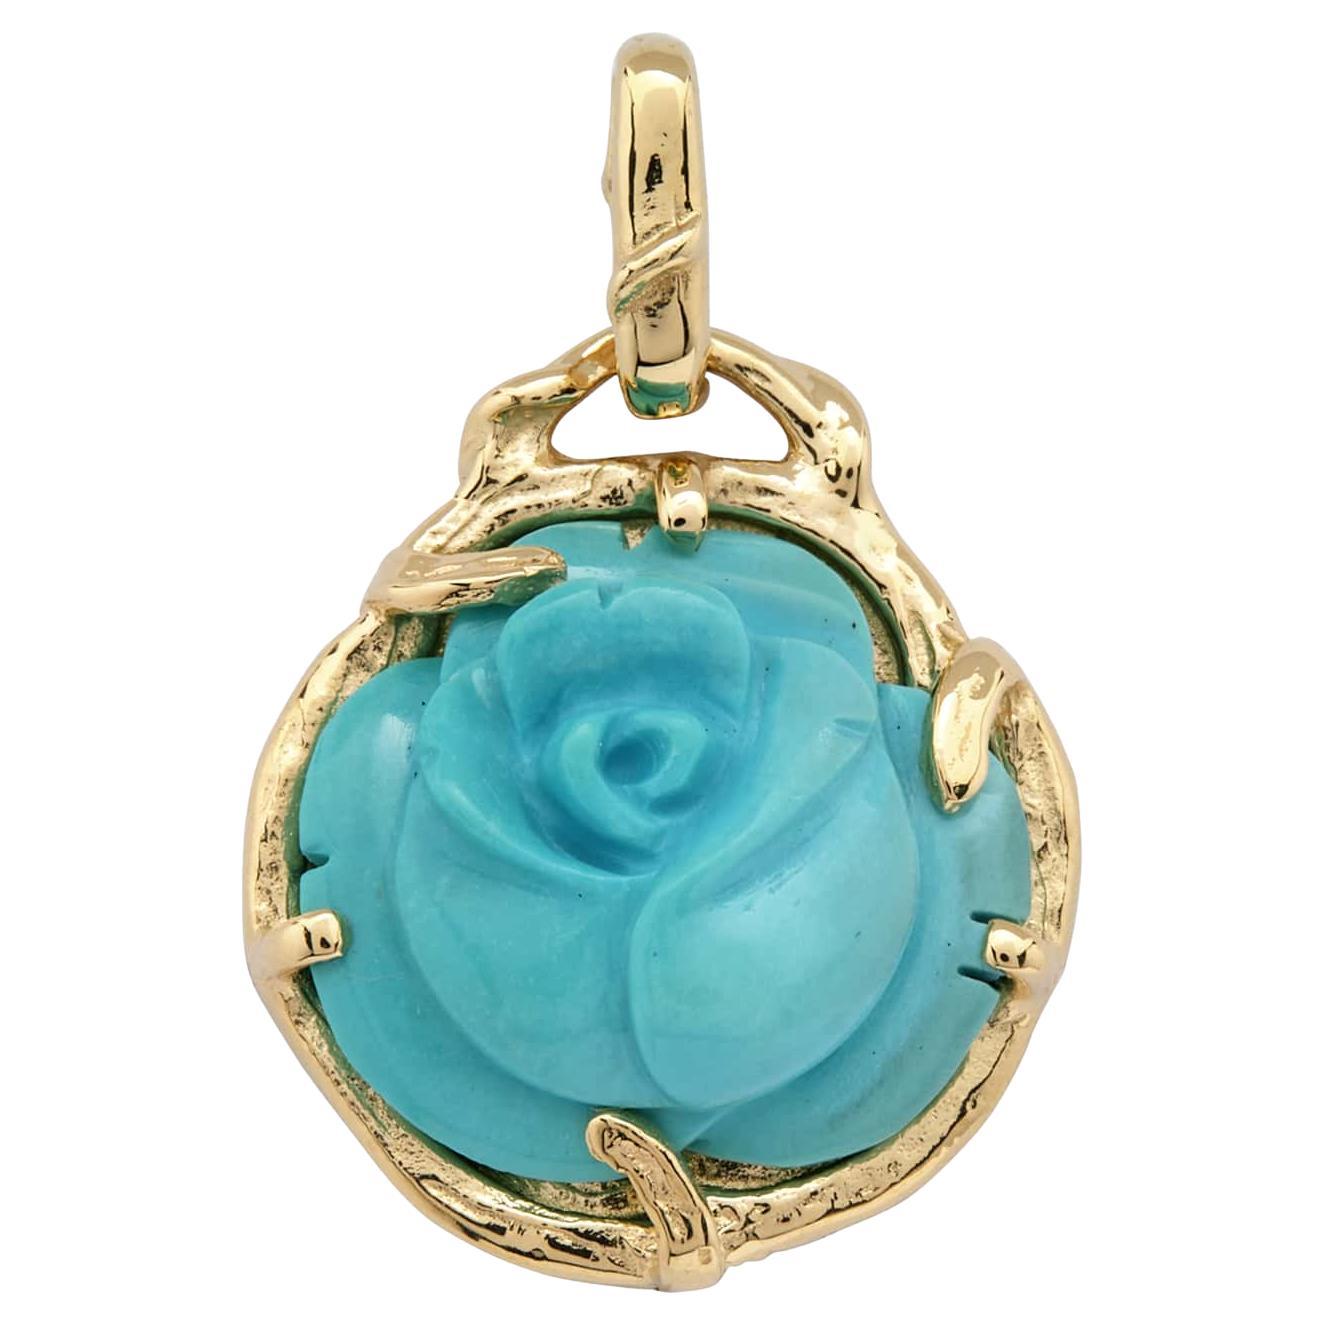 14k Yellow Gold Gabrielle Rosebud Amulet Charm, Carved Sleeping Beauty Turquoise For Sale